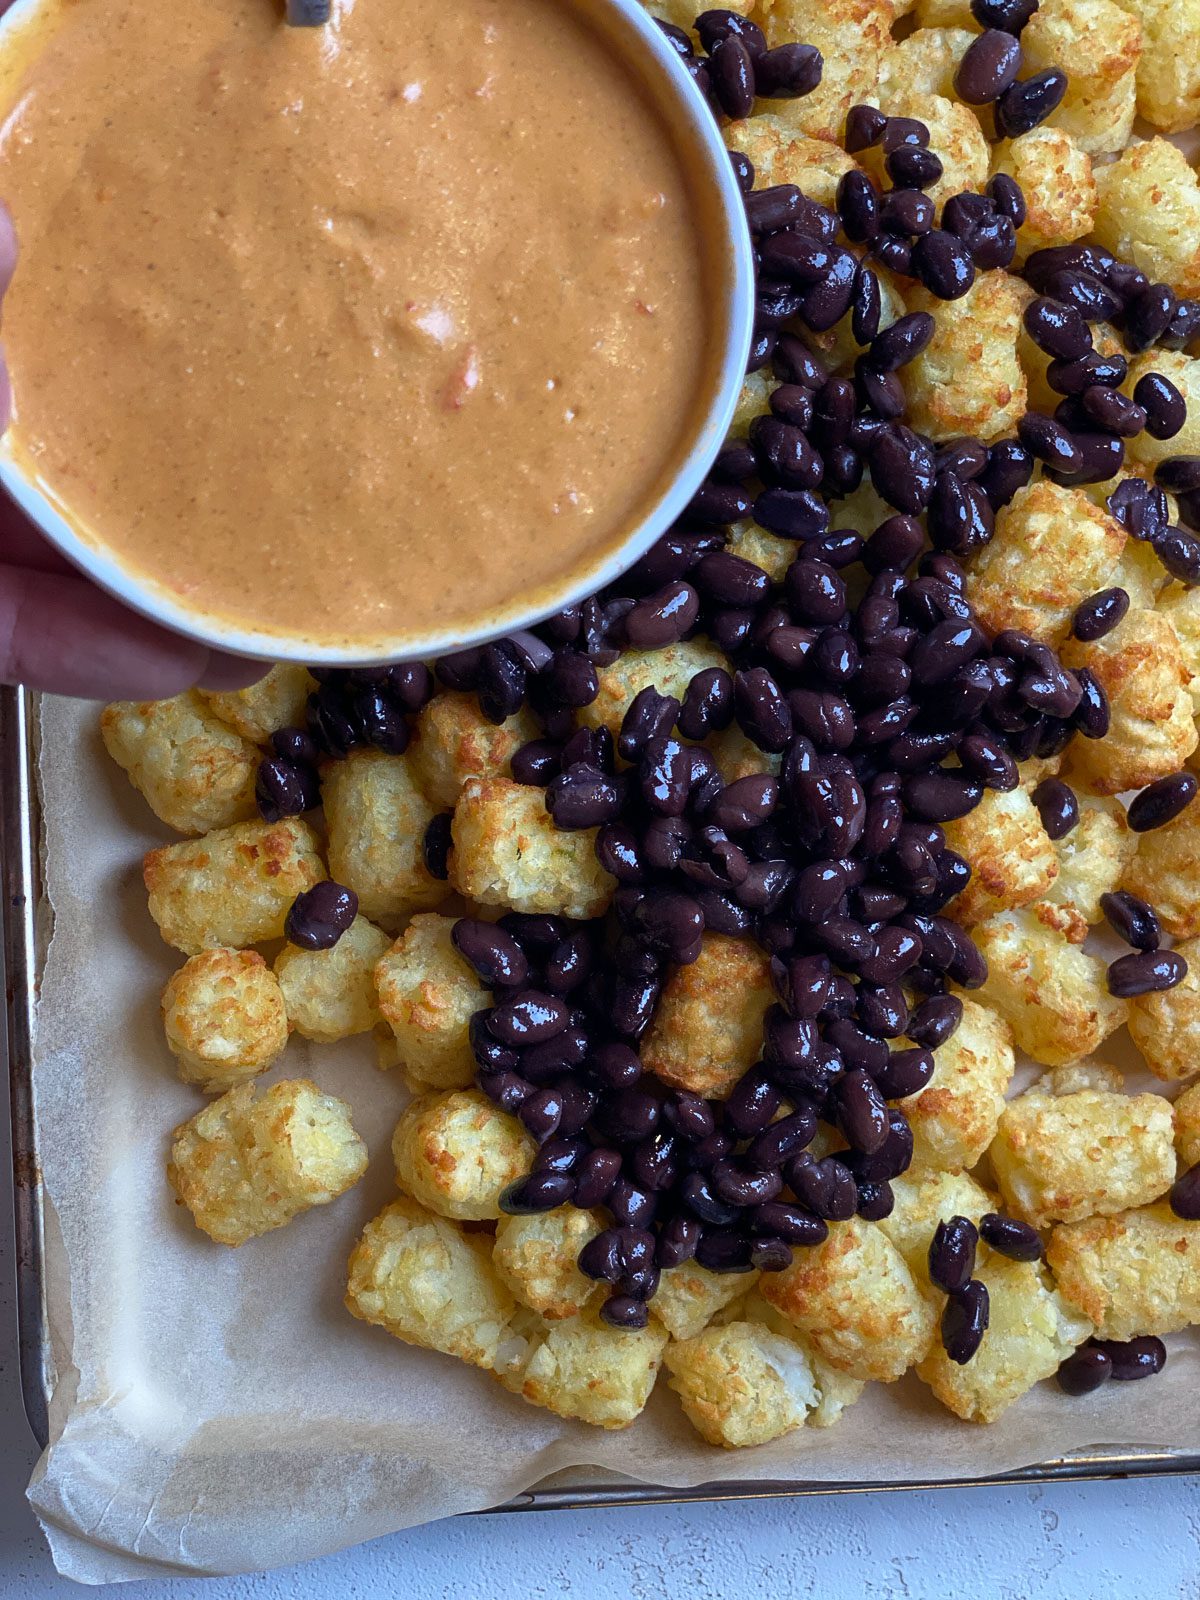 process of adding nacho sauce to tater tots and beans